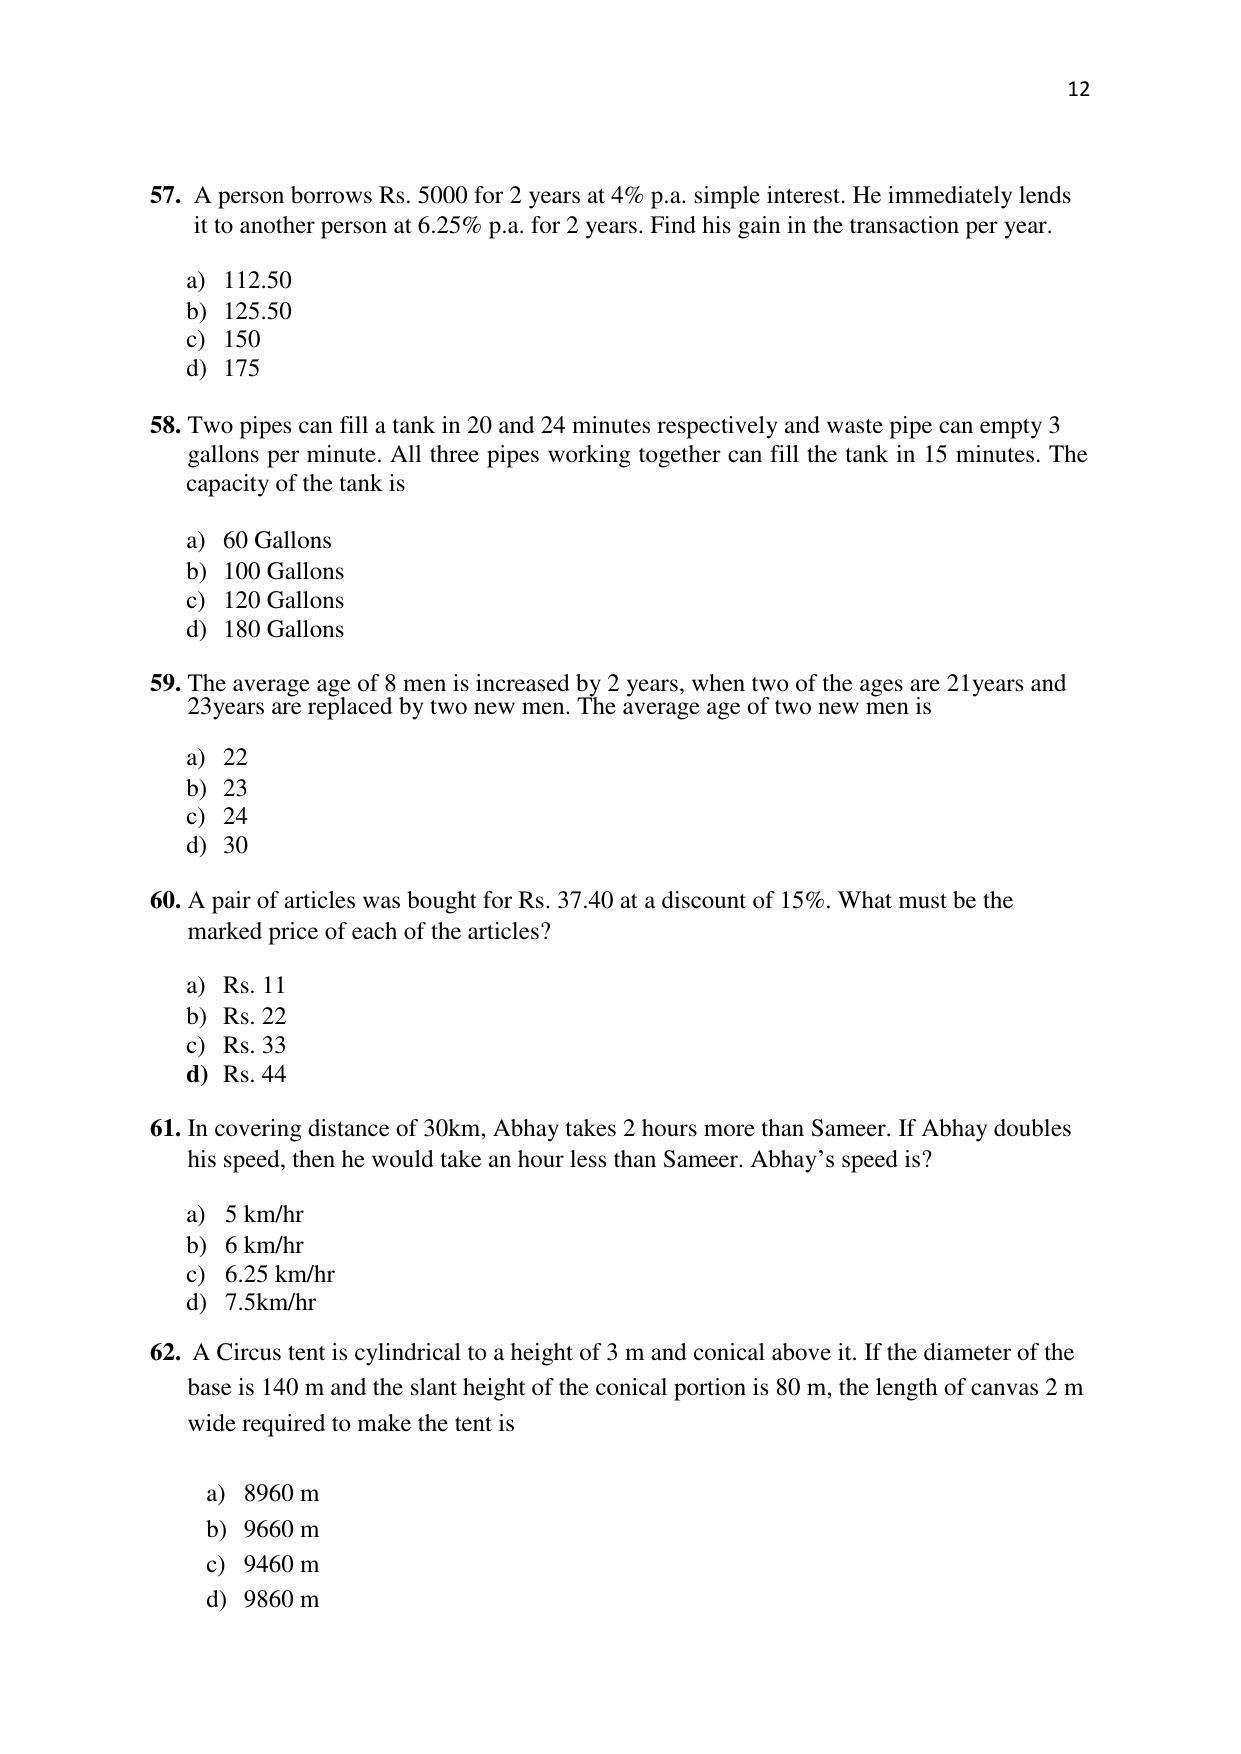 KMAT Question Papers - November 2016 - Page 12